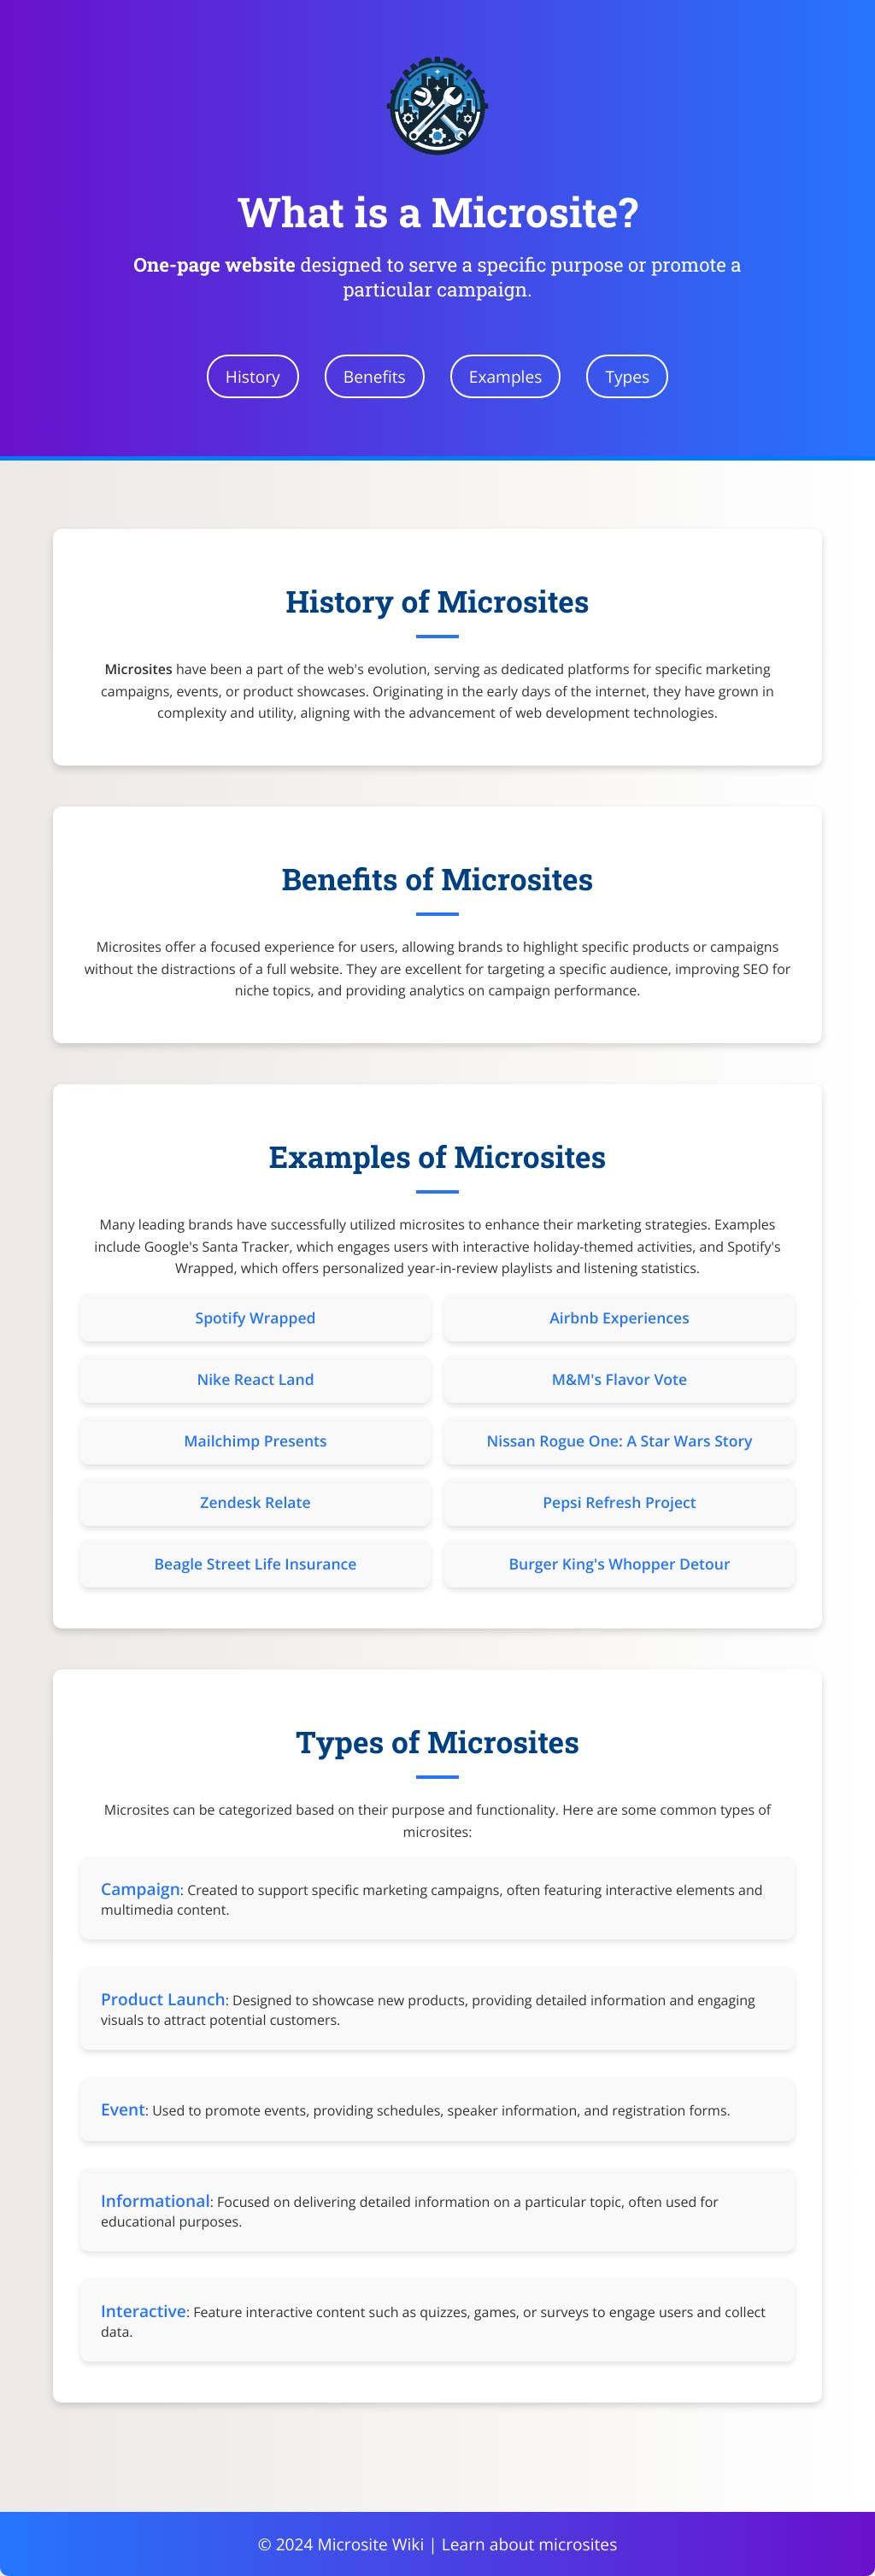 What is a Microsite?